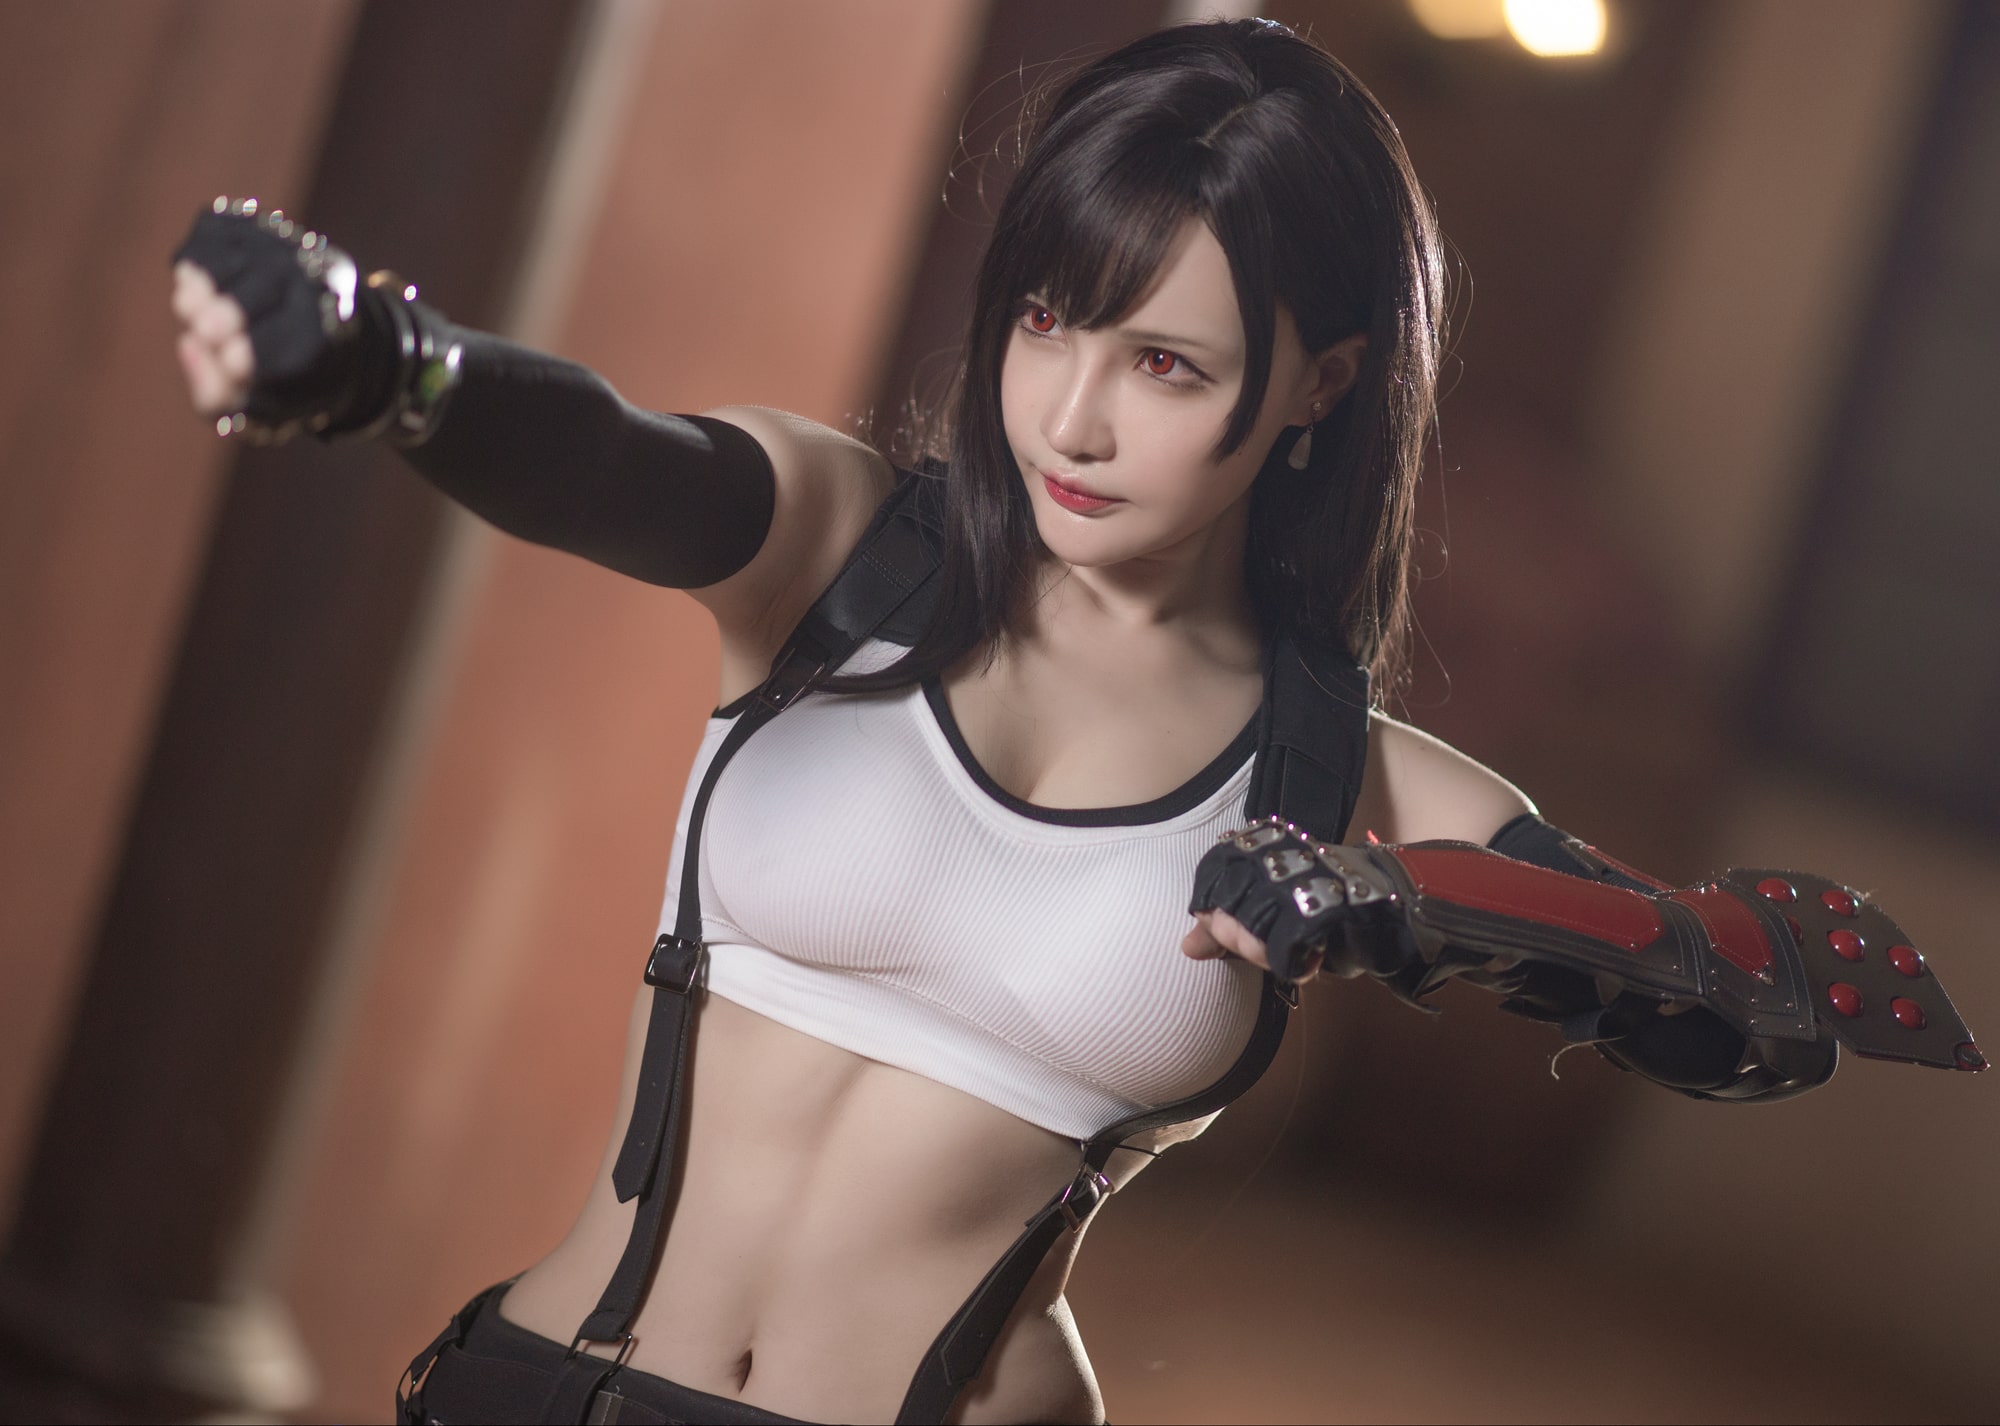 This is the sample picture from Senya Miku 千夜未来 - Tifa post. Click here to see image full size.